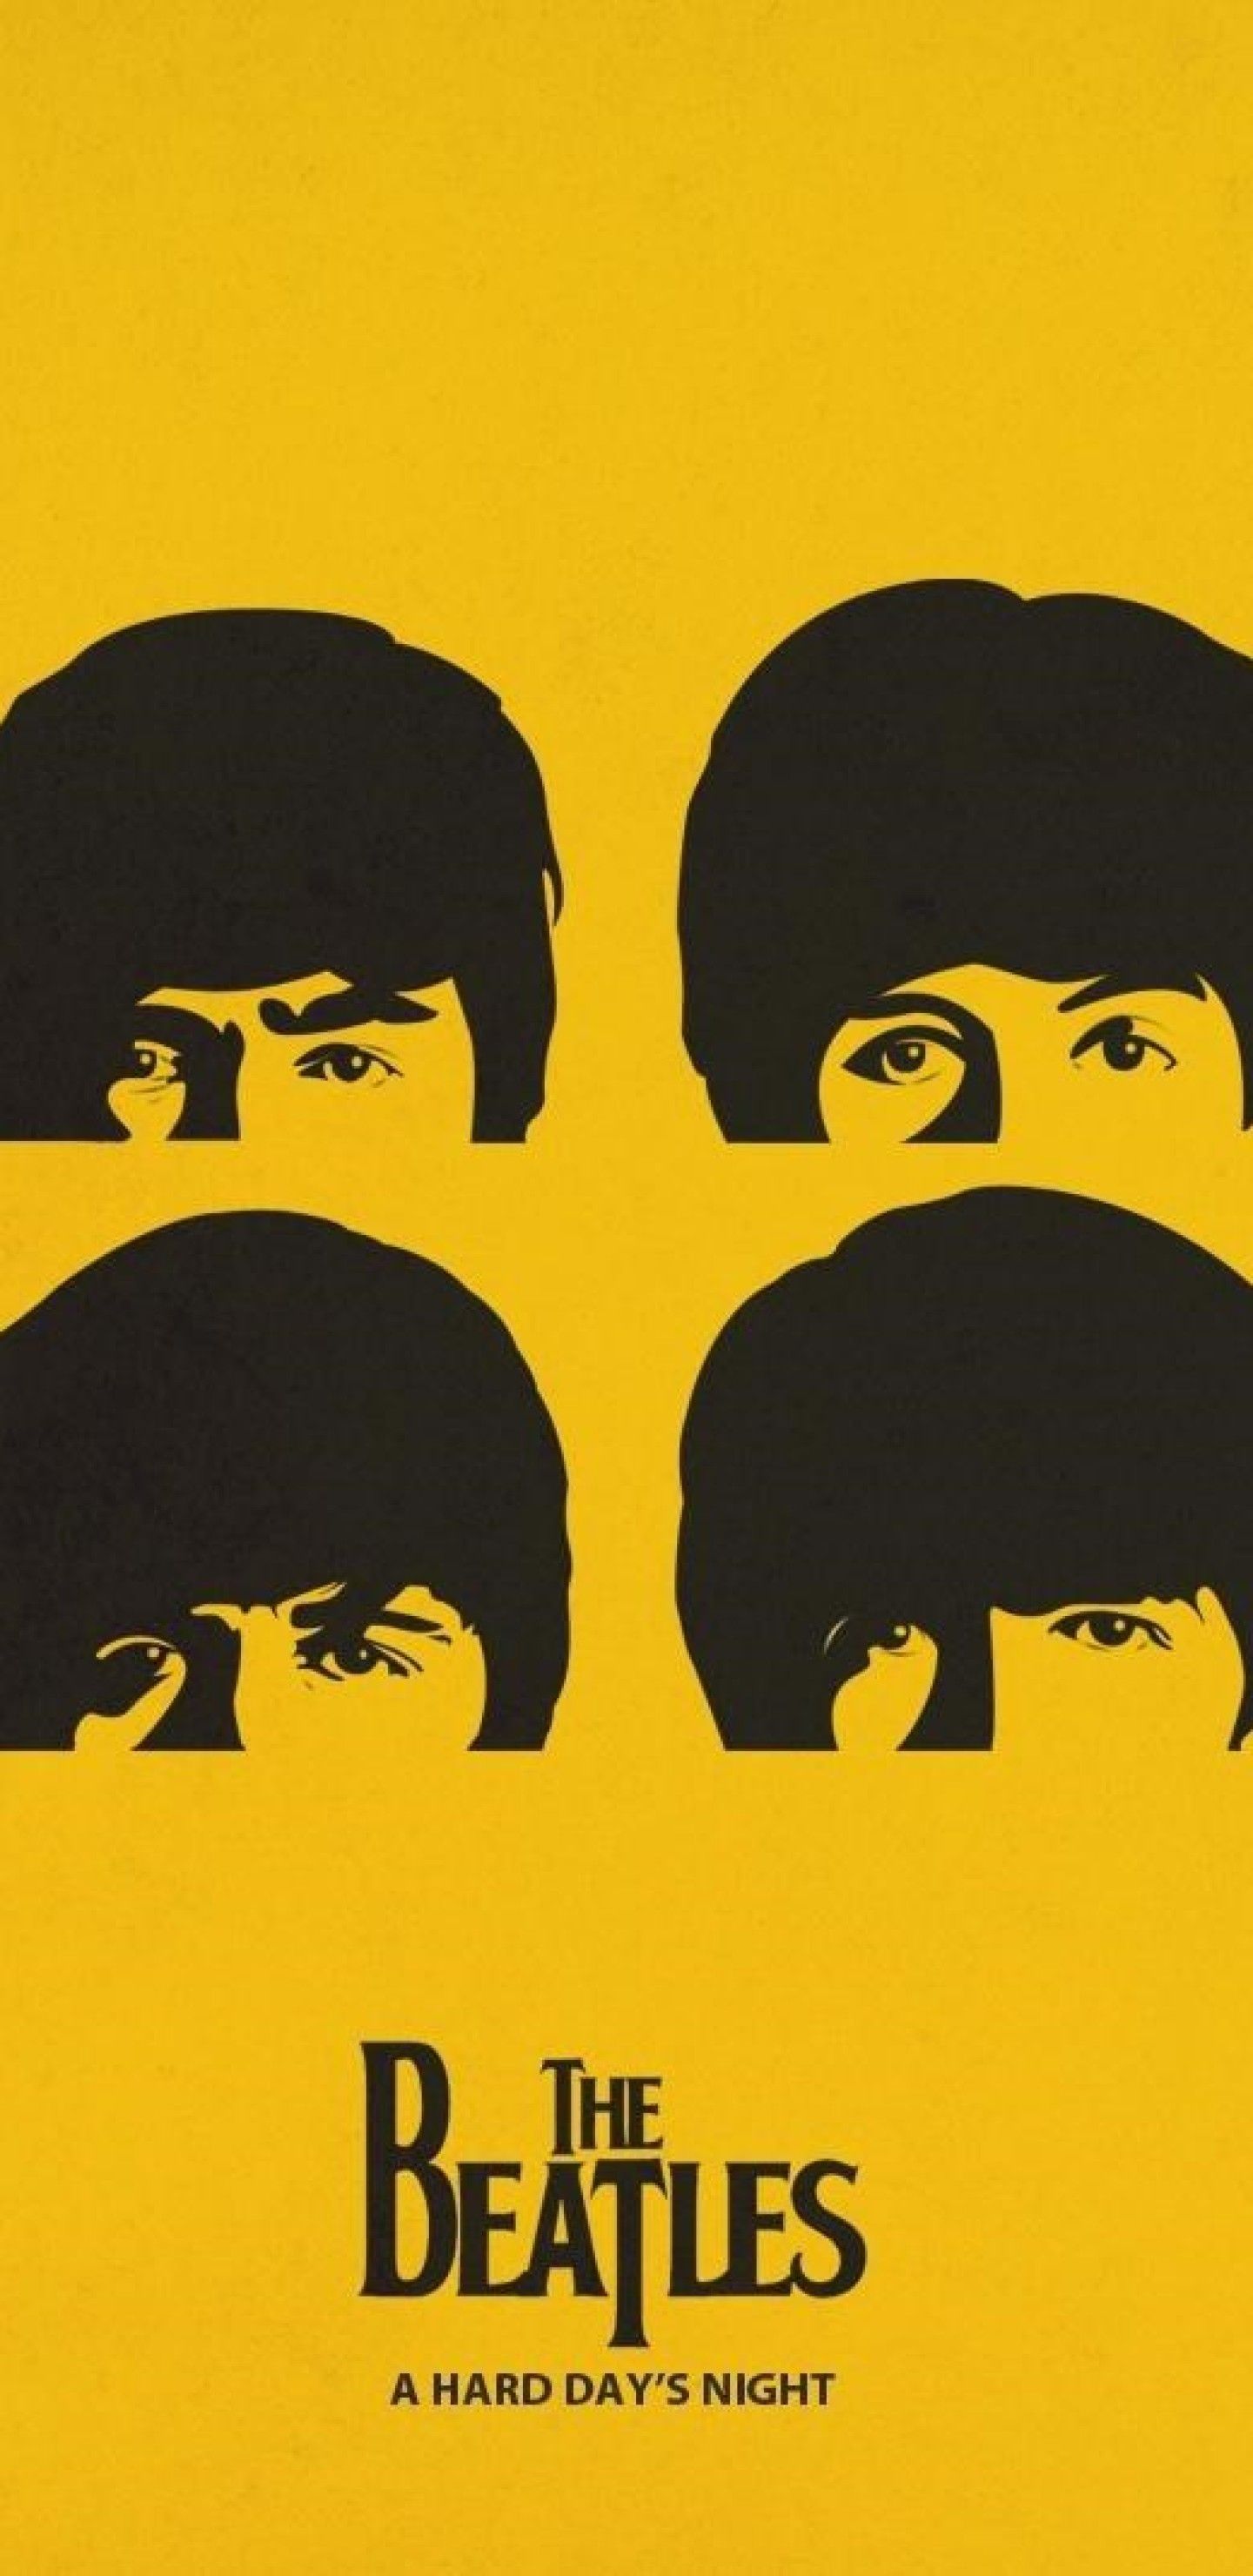 The Beatles Minimalism Samsung Galaxy Note S S8